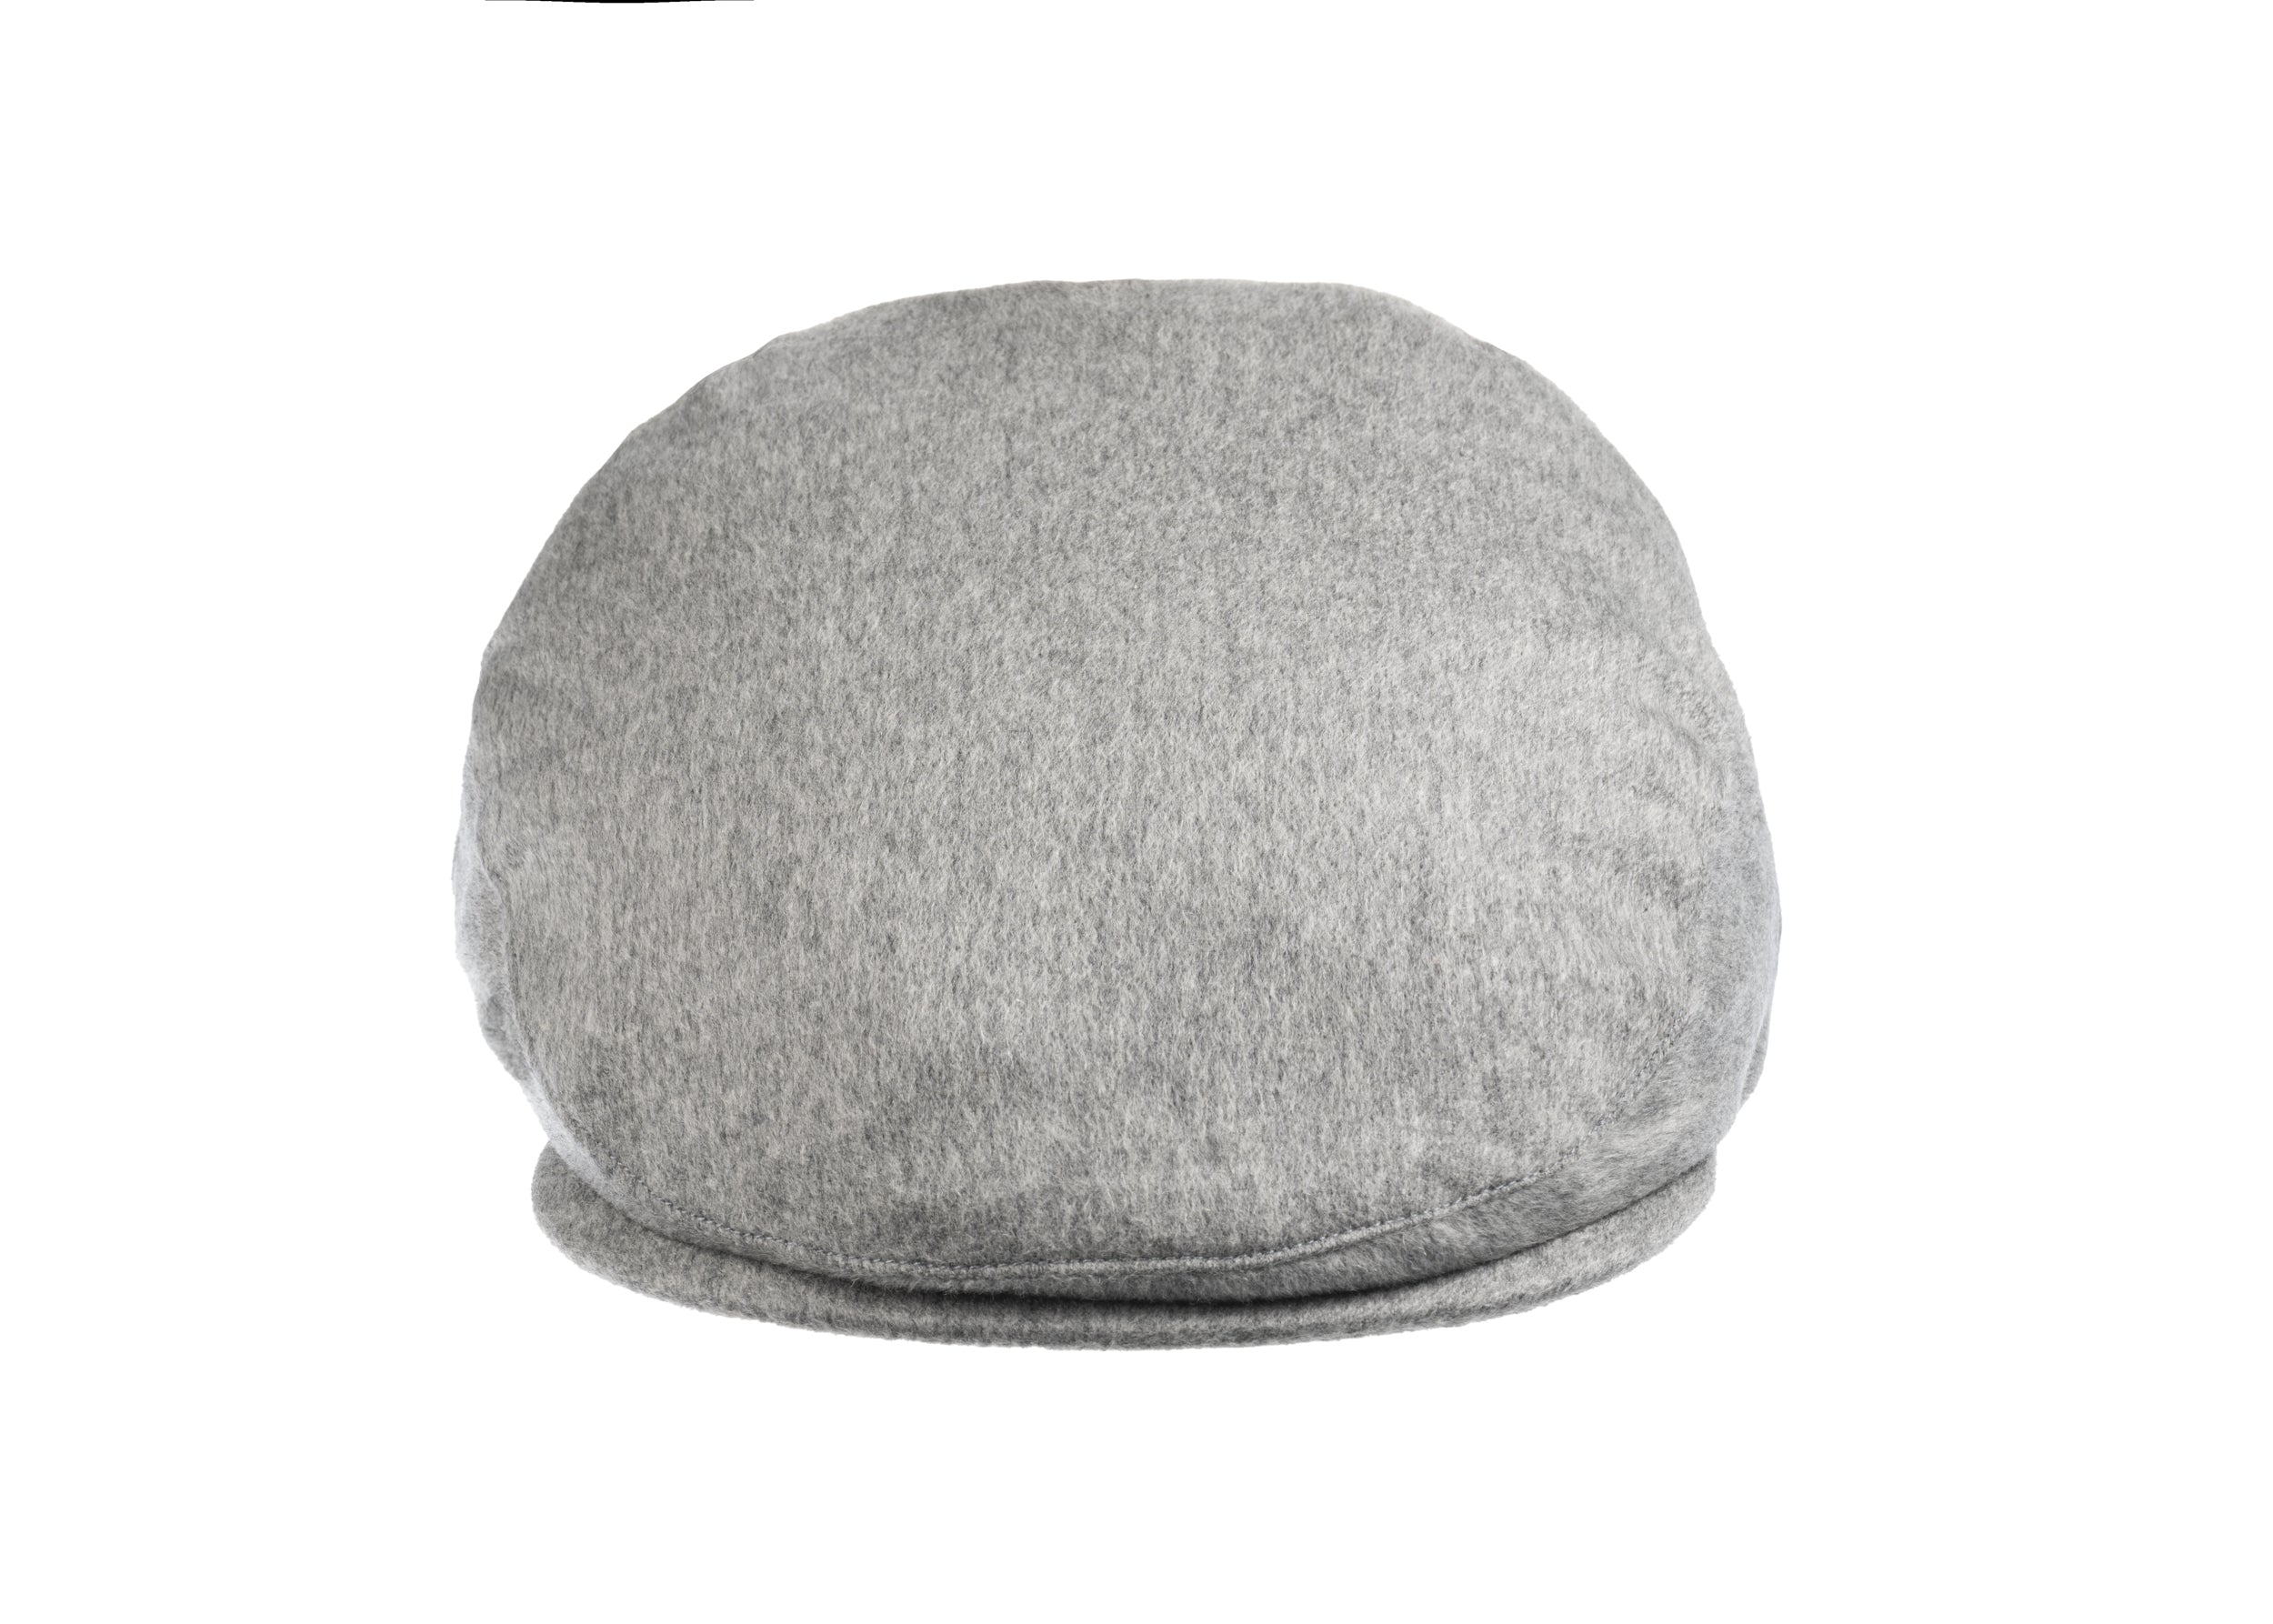 Christys' x Johnstons of Elgin Cashmere Made in England Balmoral Cap in Light Grey